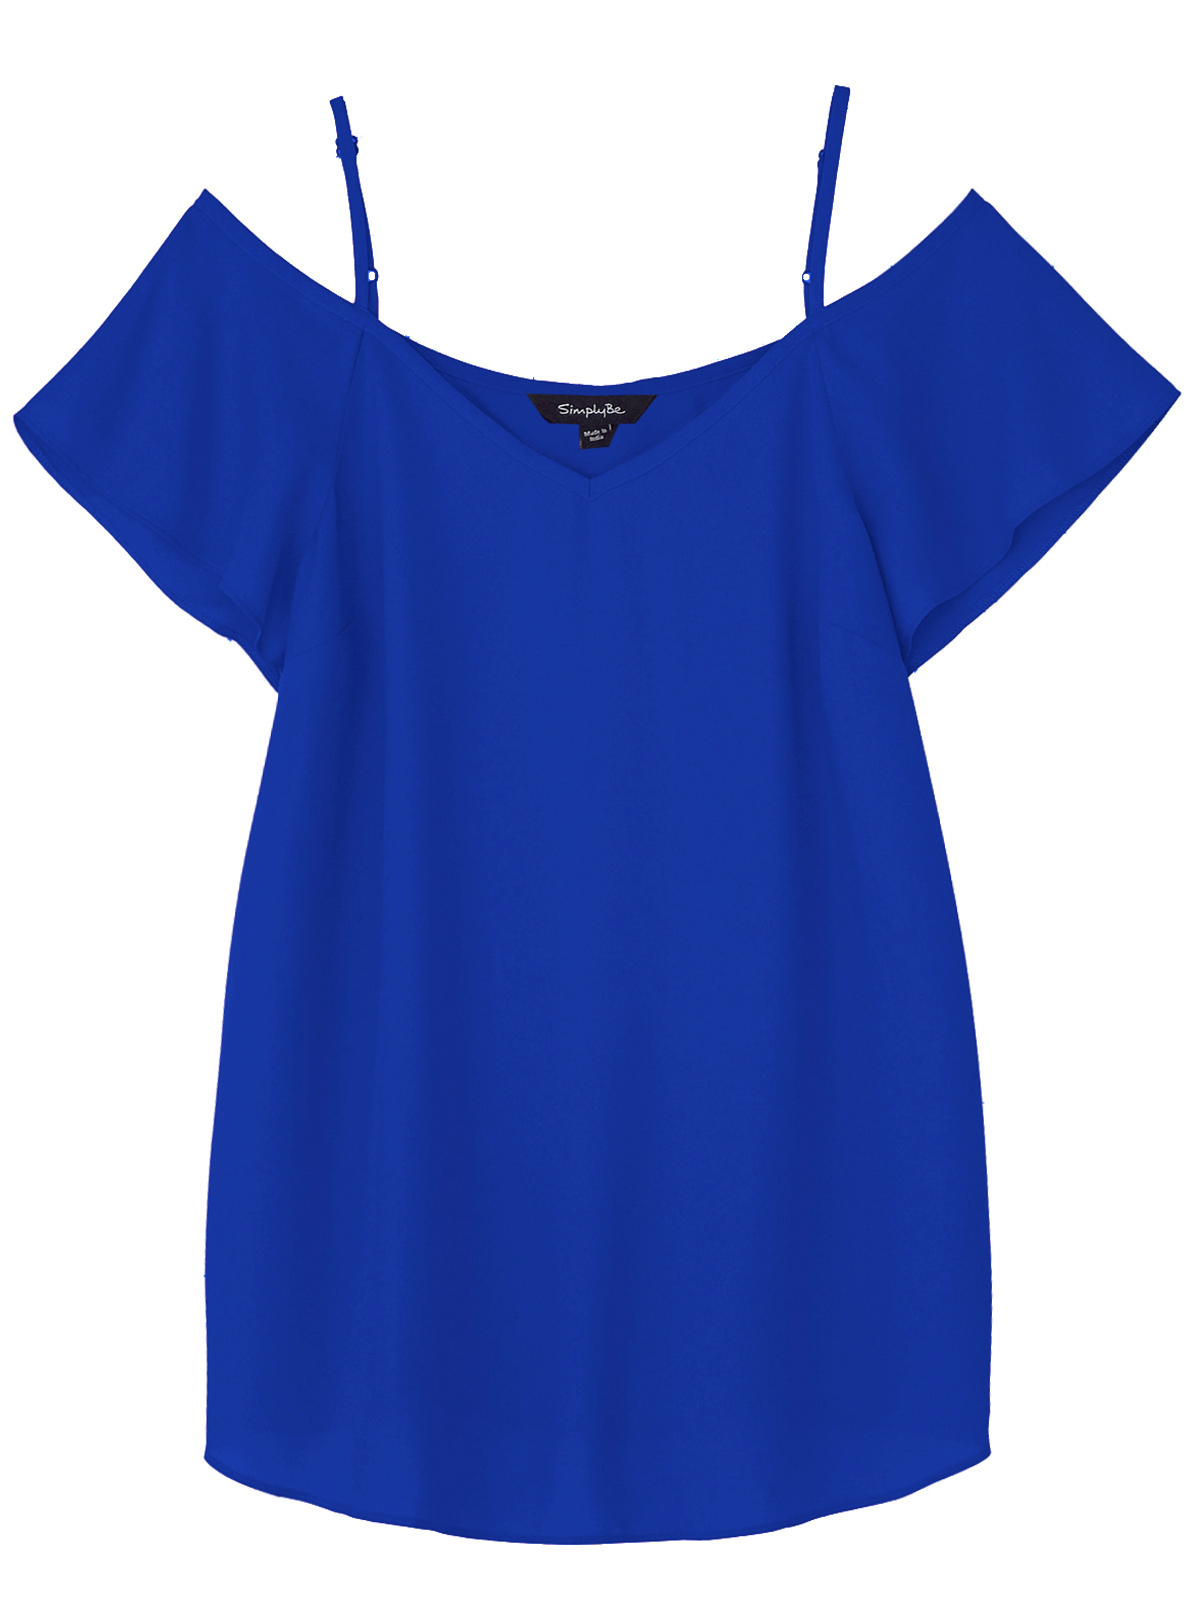 Plus Size wholesale clothing by simply be - - SimplyBe BLUE Strappy Off ...